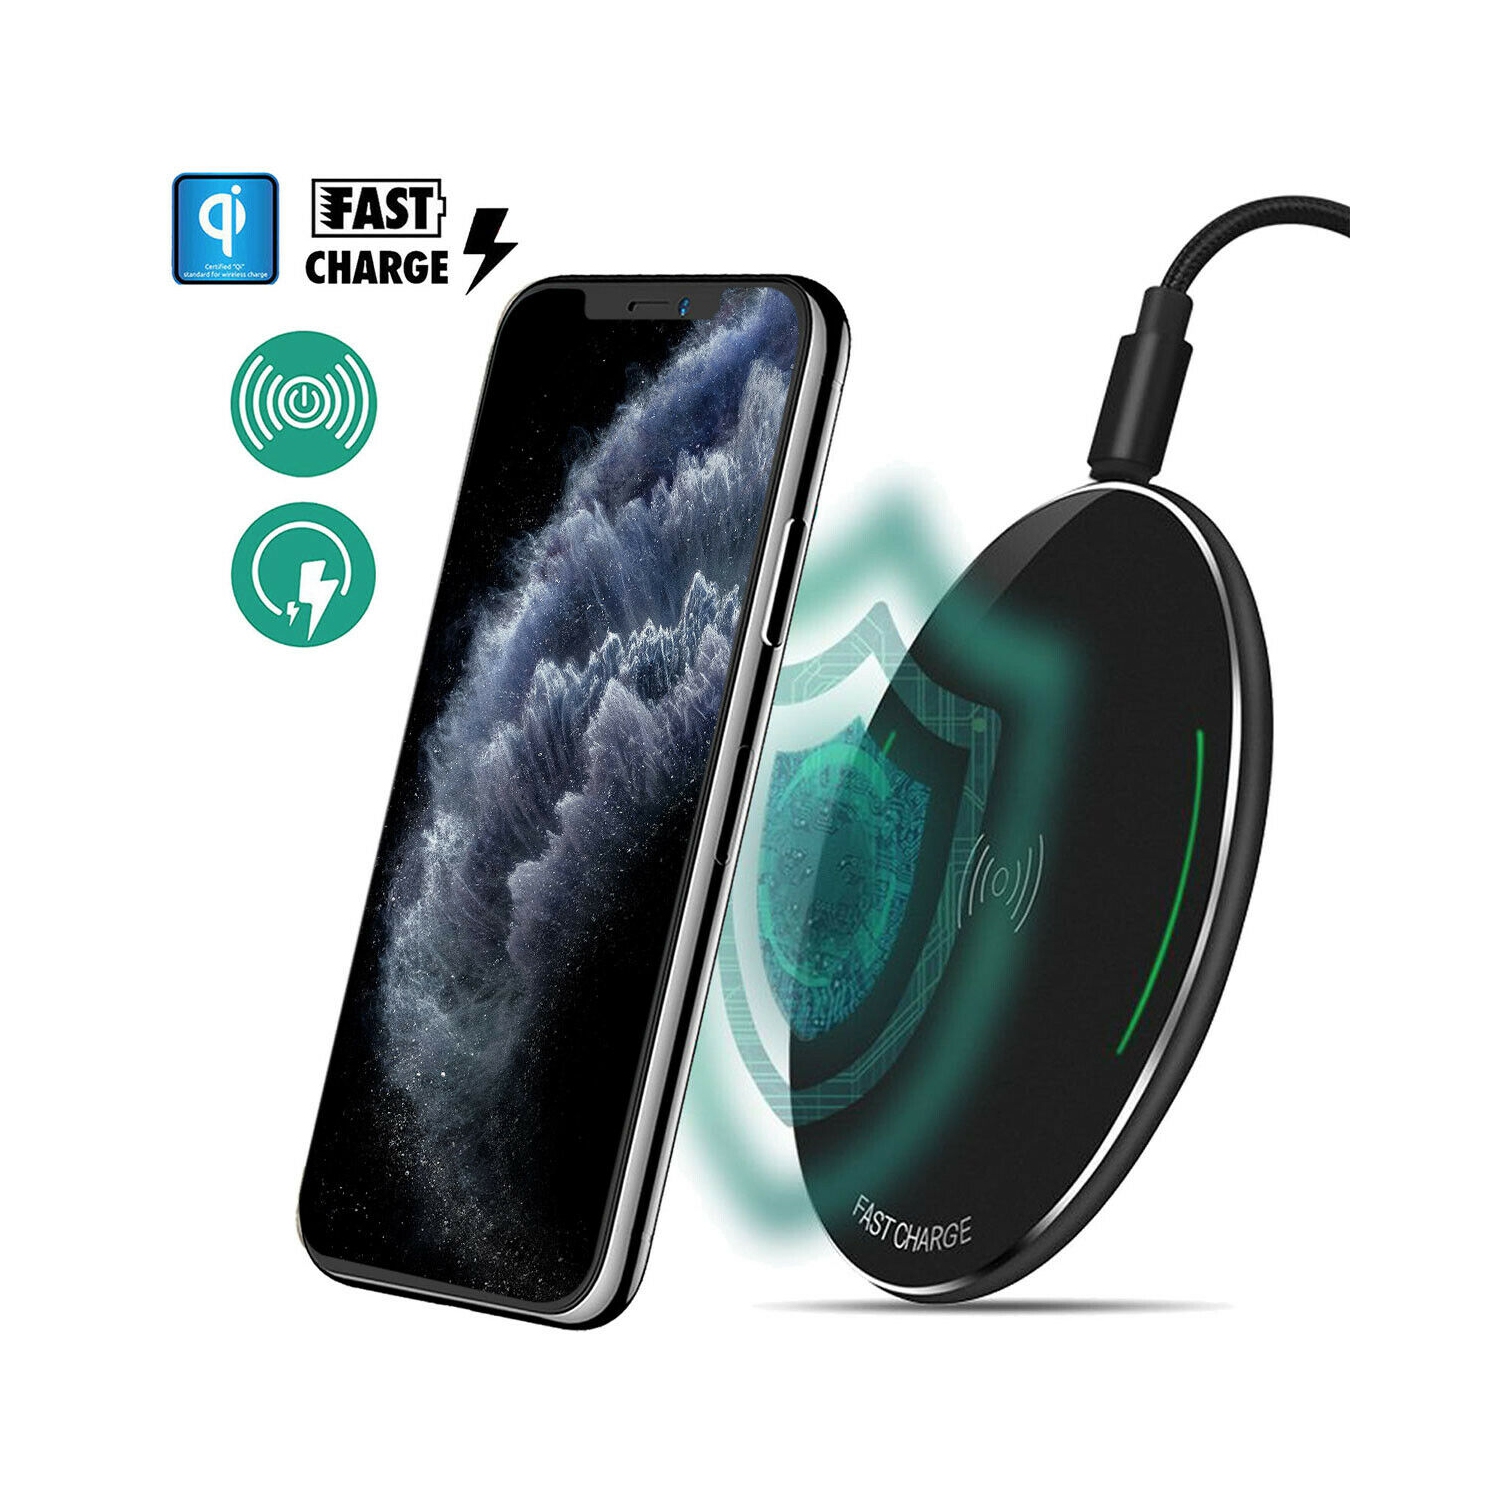 Wireless Charger Pad Qi-Certified 10W for iPhone SE (2020), 11 Pro Xs Max, XR, 8